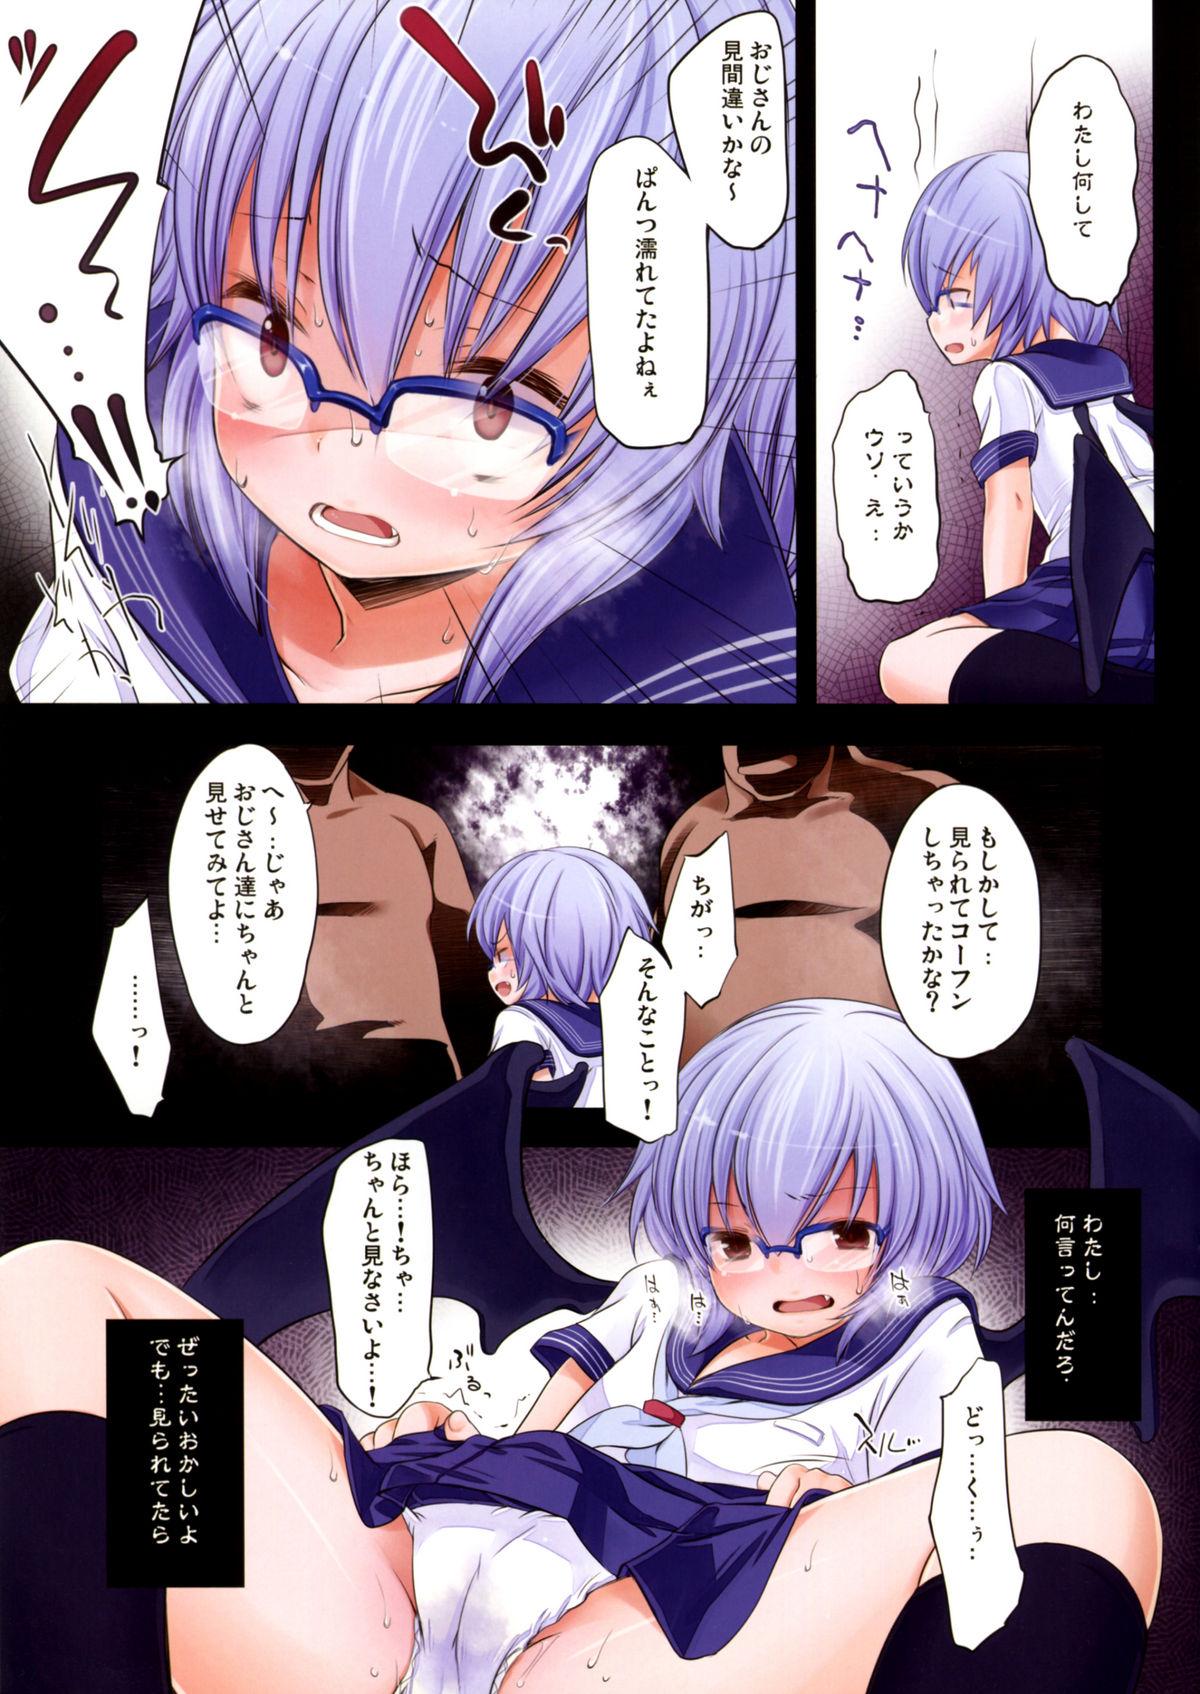 Assfingering Pedoria!! - Touhou project Transexual - Page 5